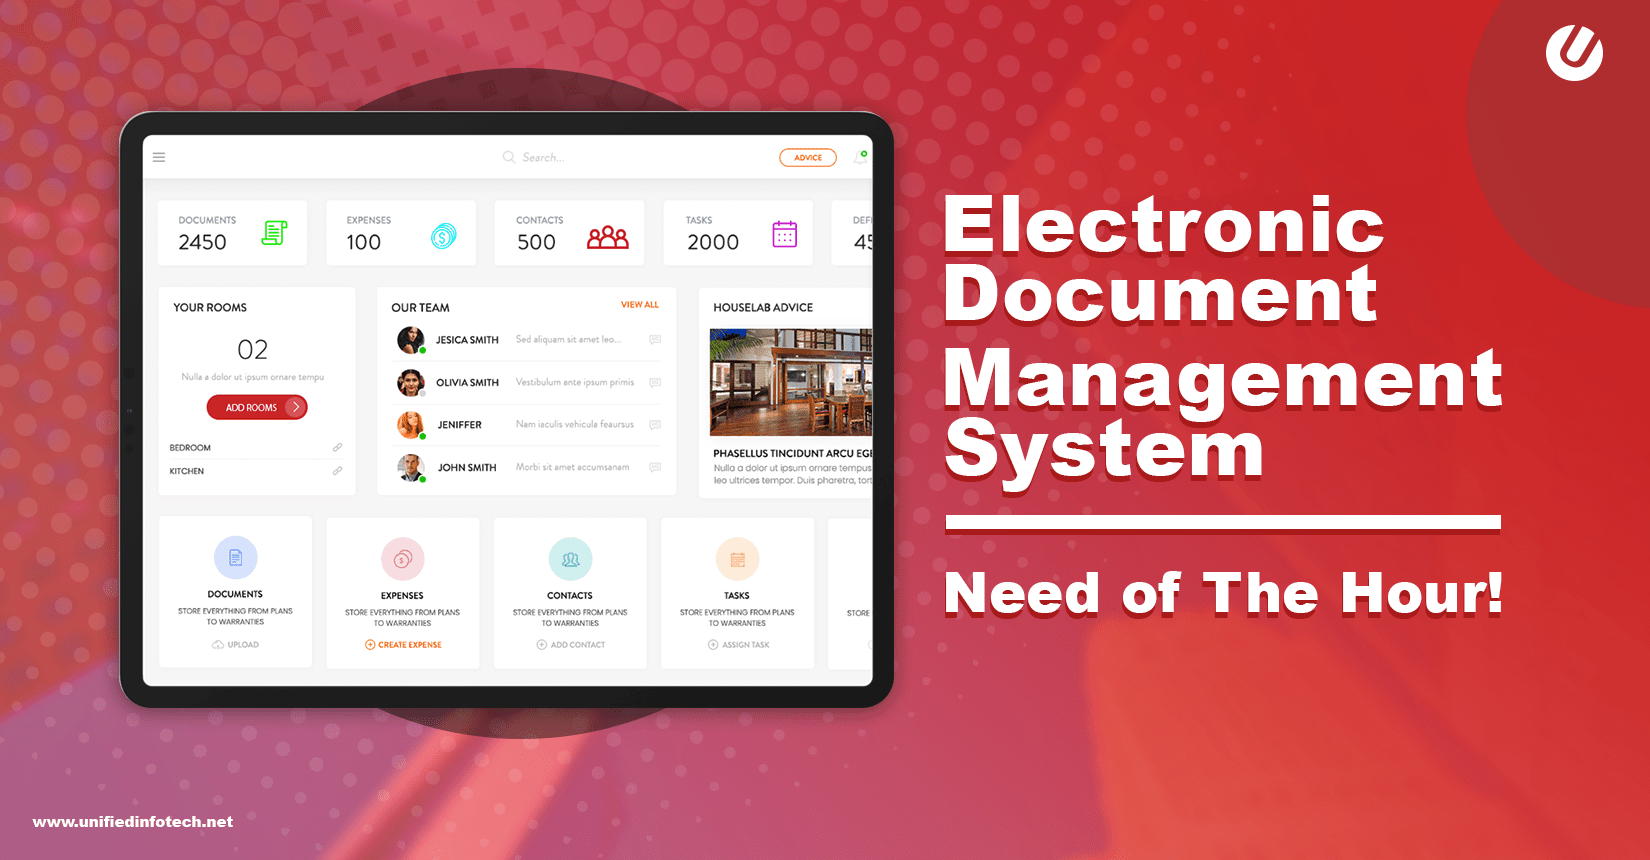 Electronic Document Management System – Why Do We Need It Now